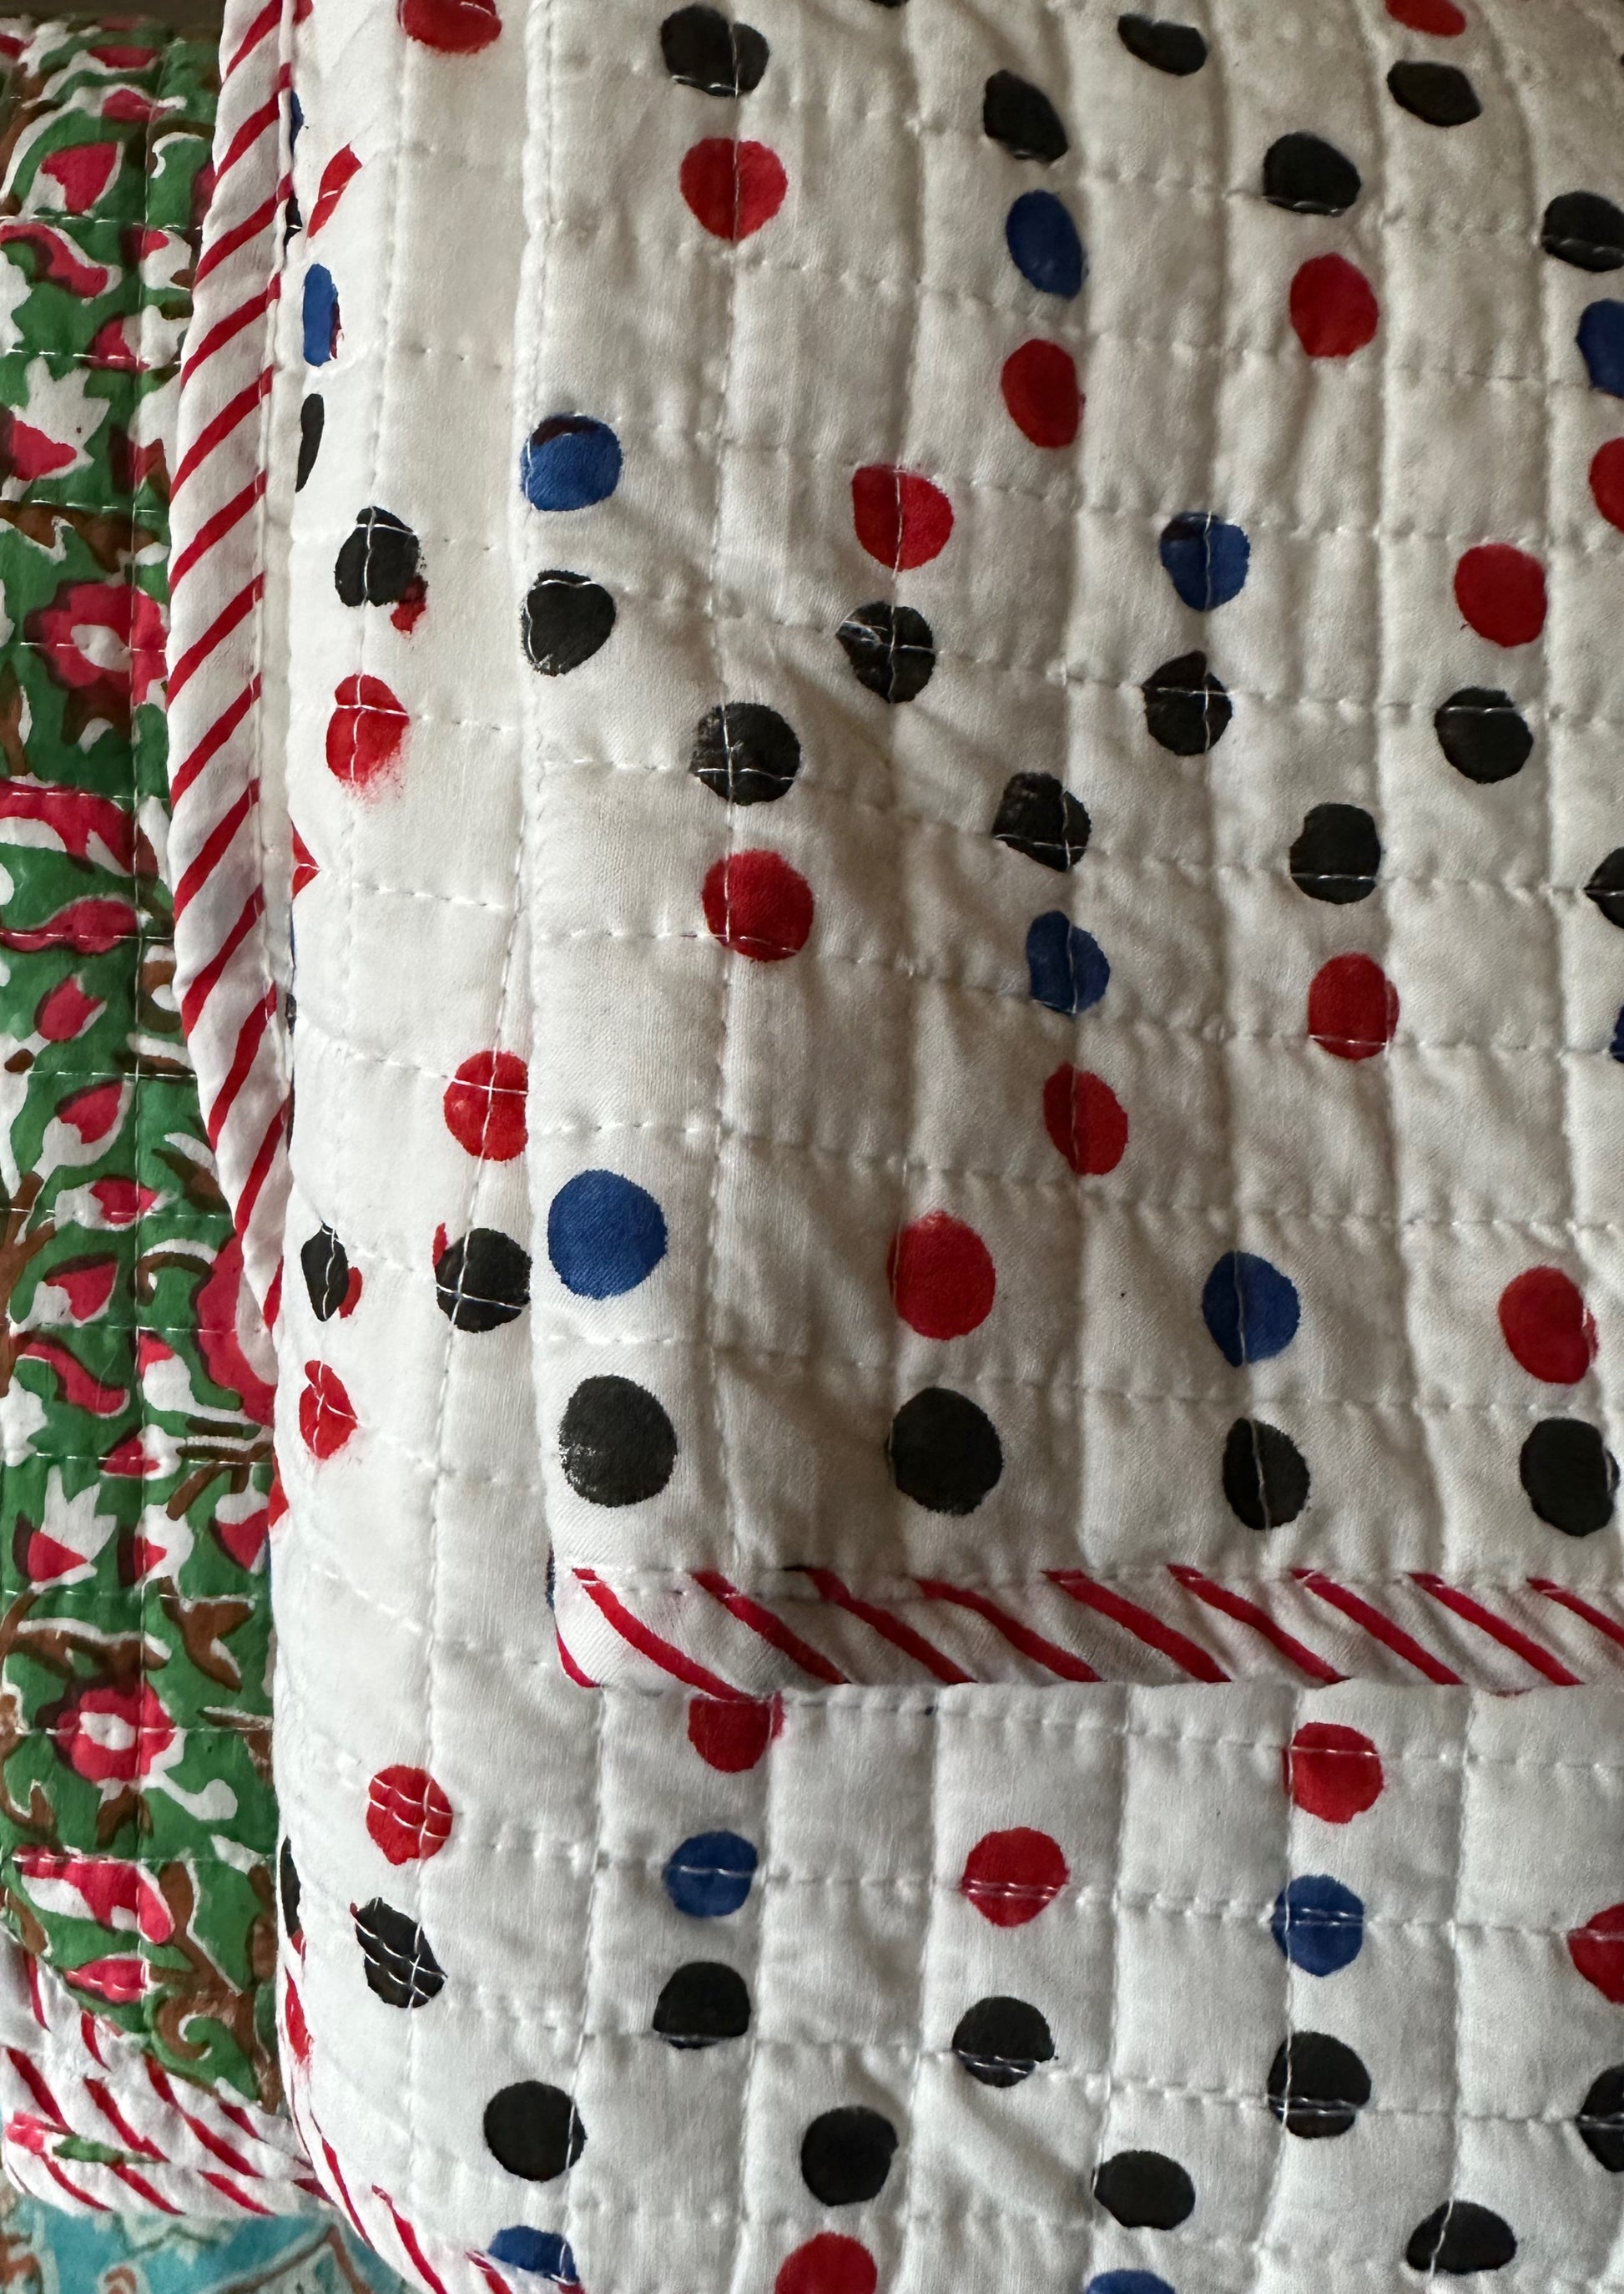 Red, blue, and black polka dot baby blanket with candy piping. ##PolkaDotBabyBlanket 🍭 - DharBazaar